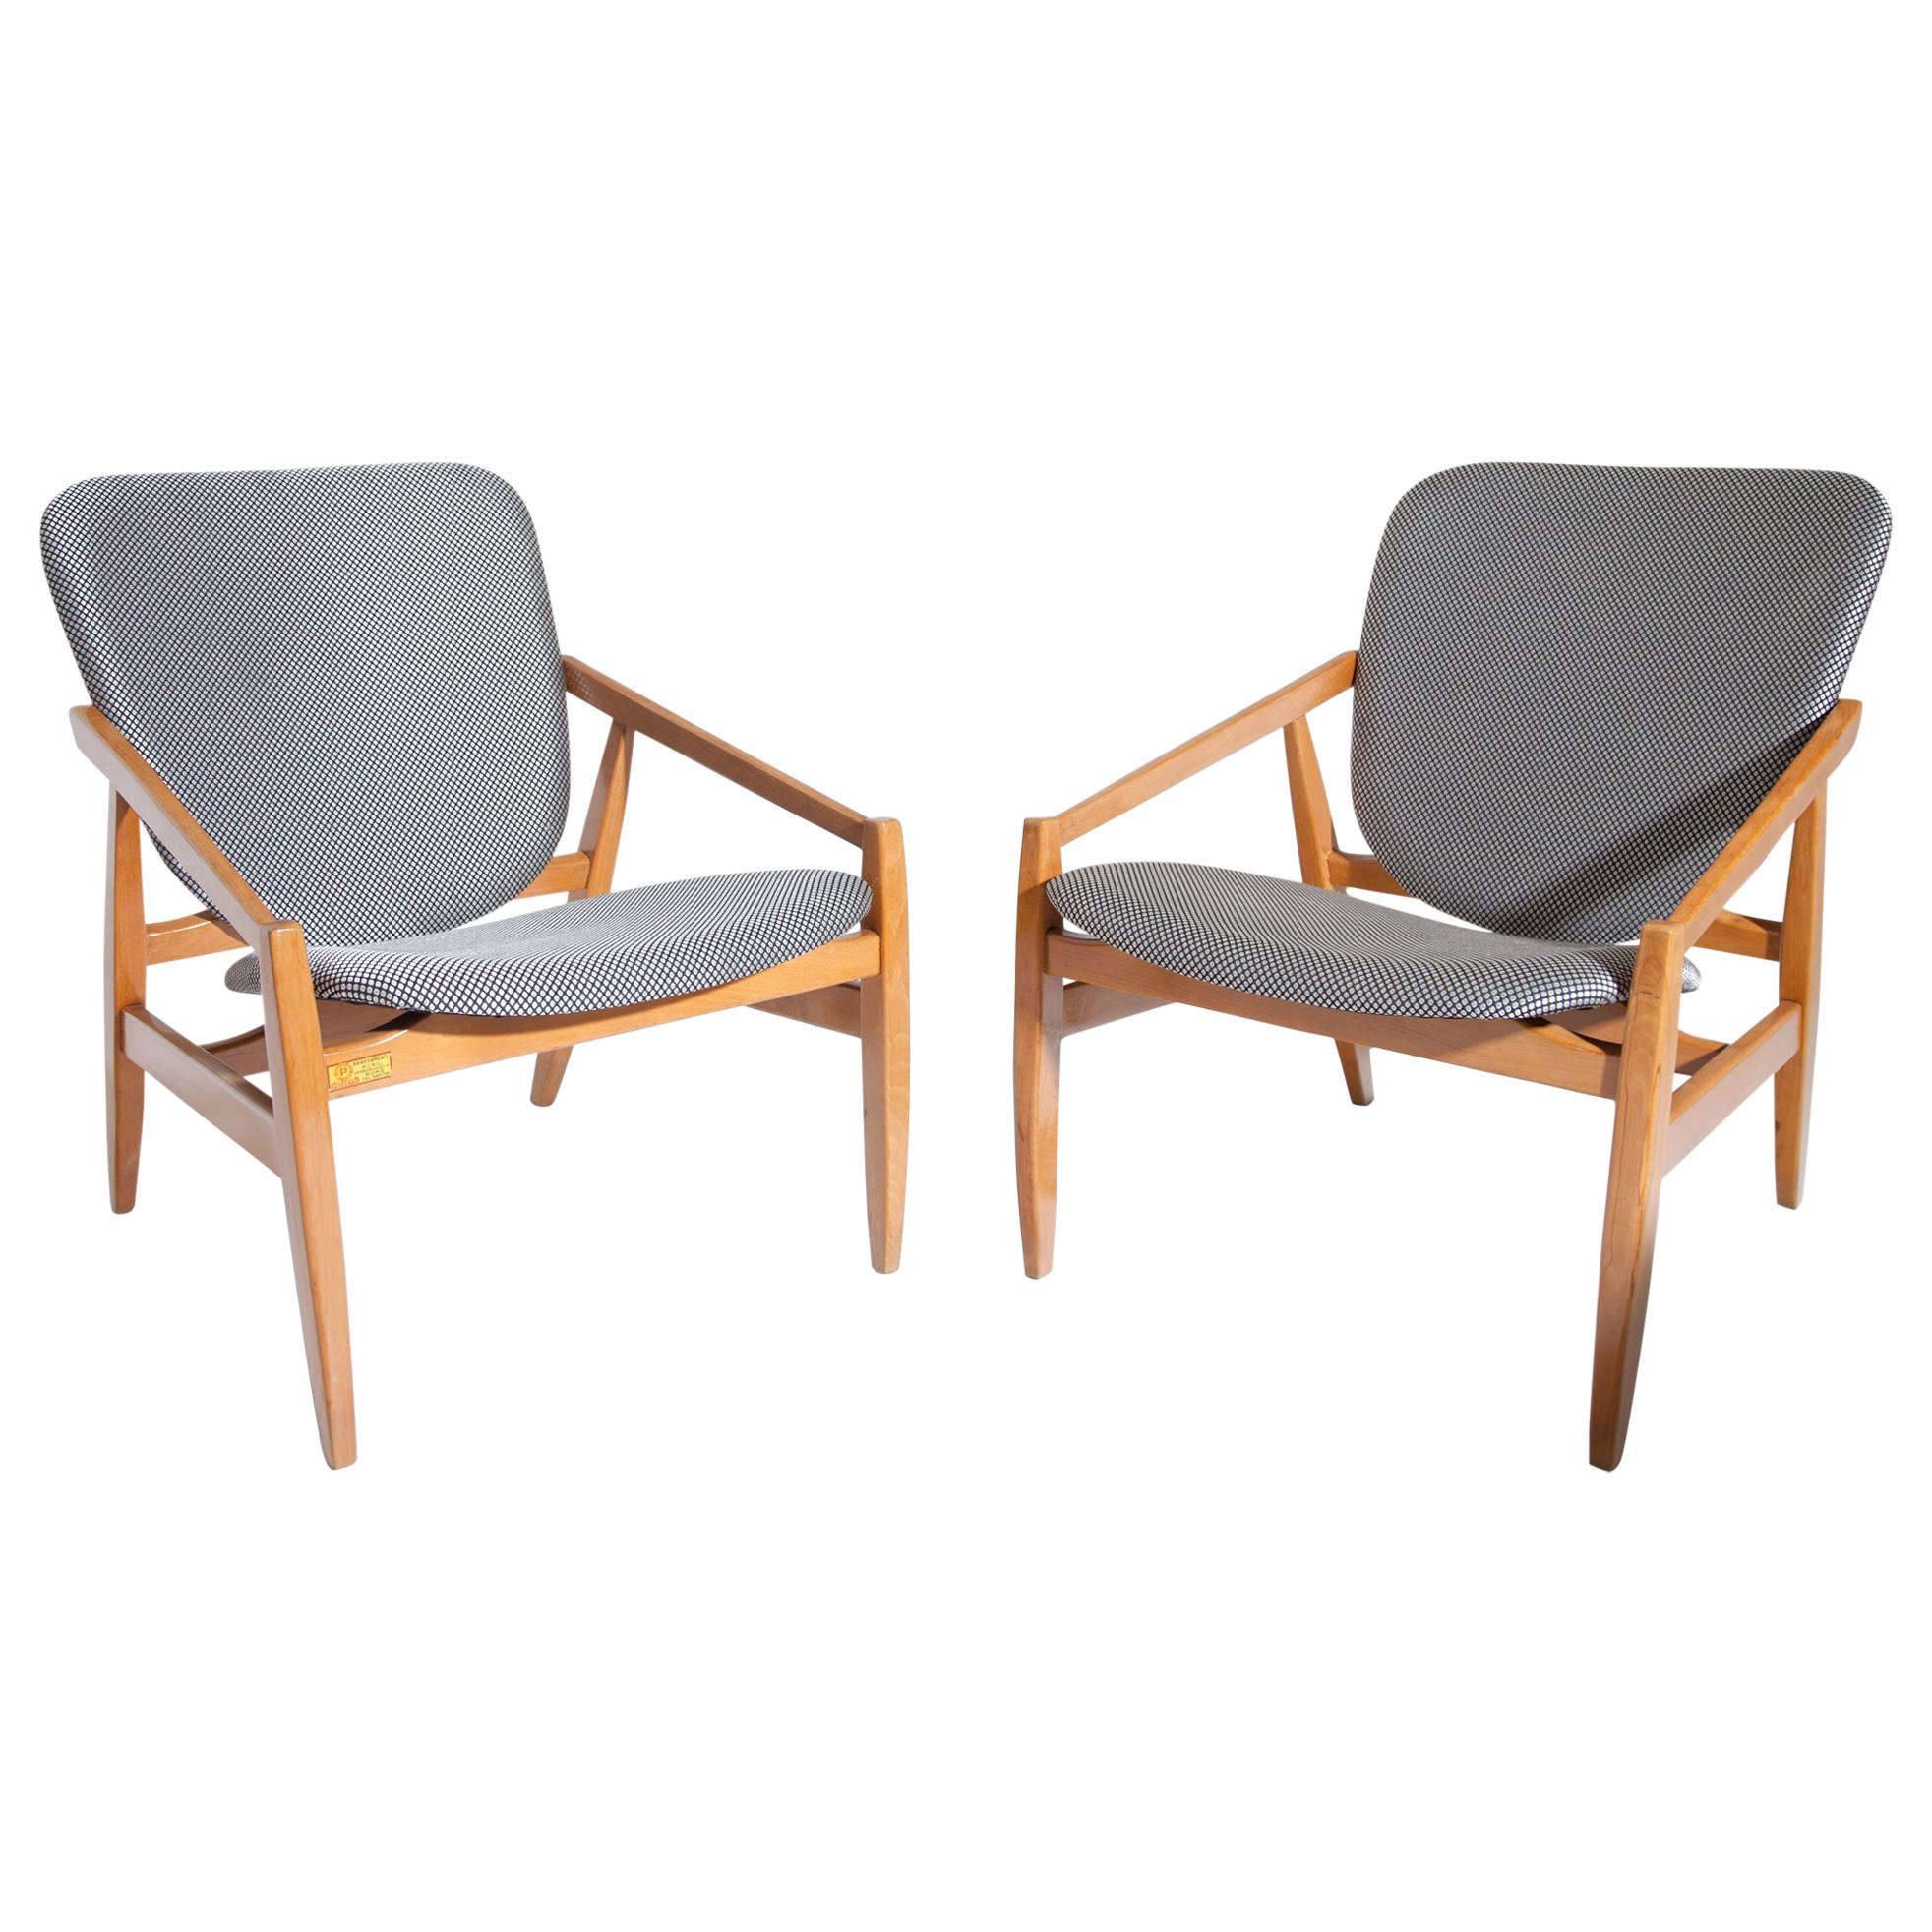 Pair of Armchairs by Pizzetti, Italy, Mid-20th Century